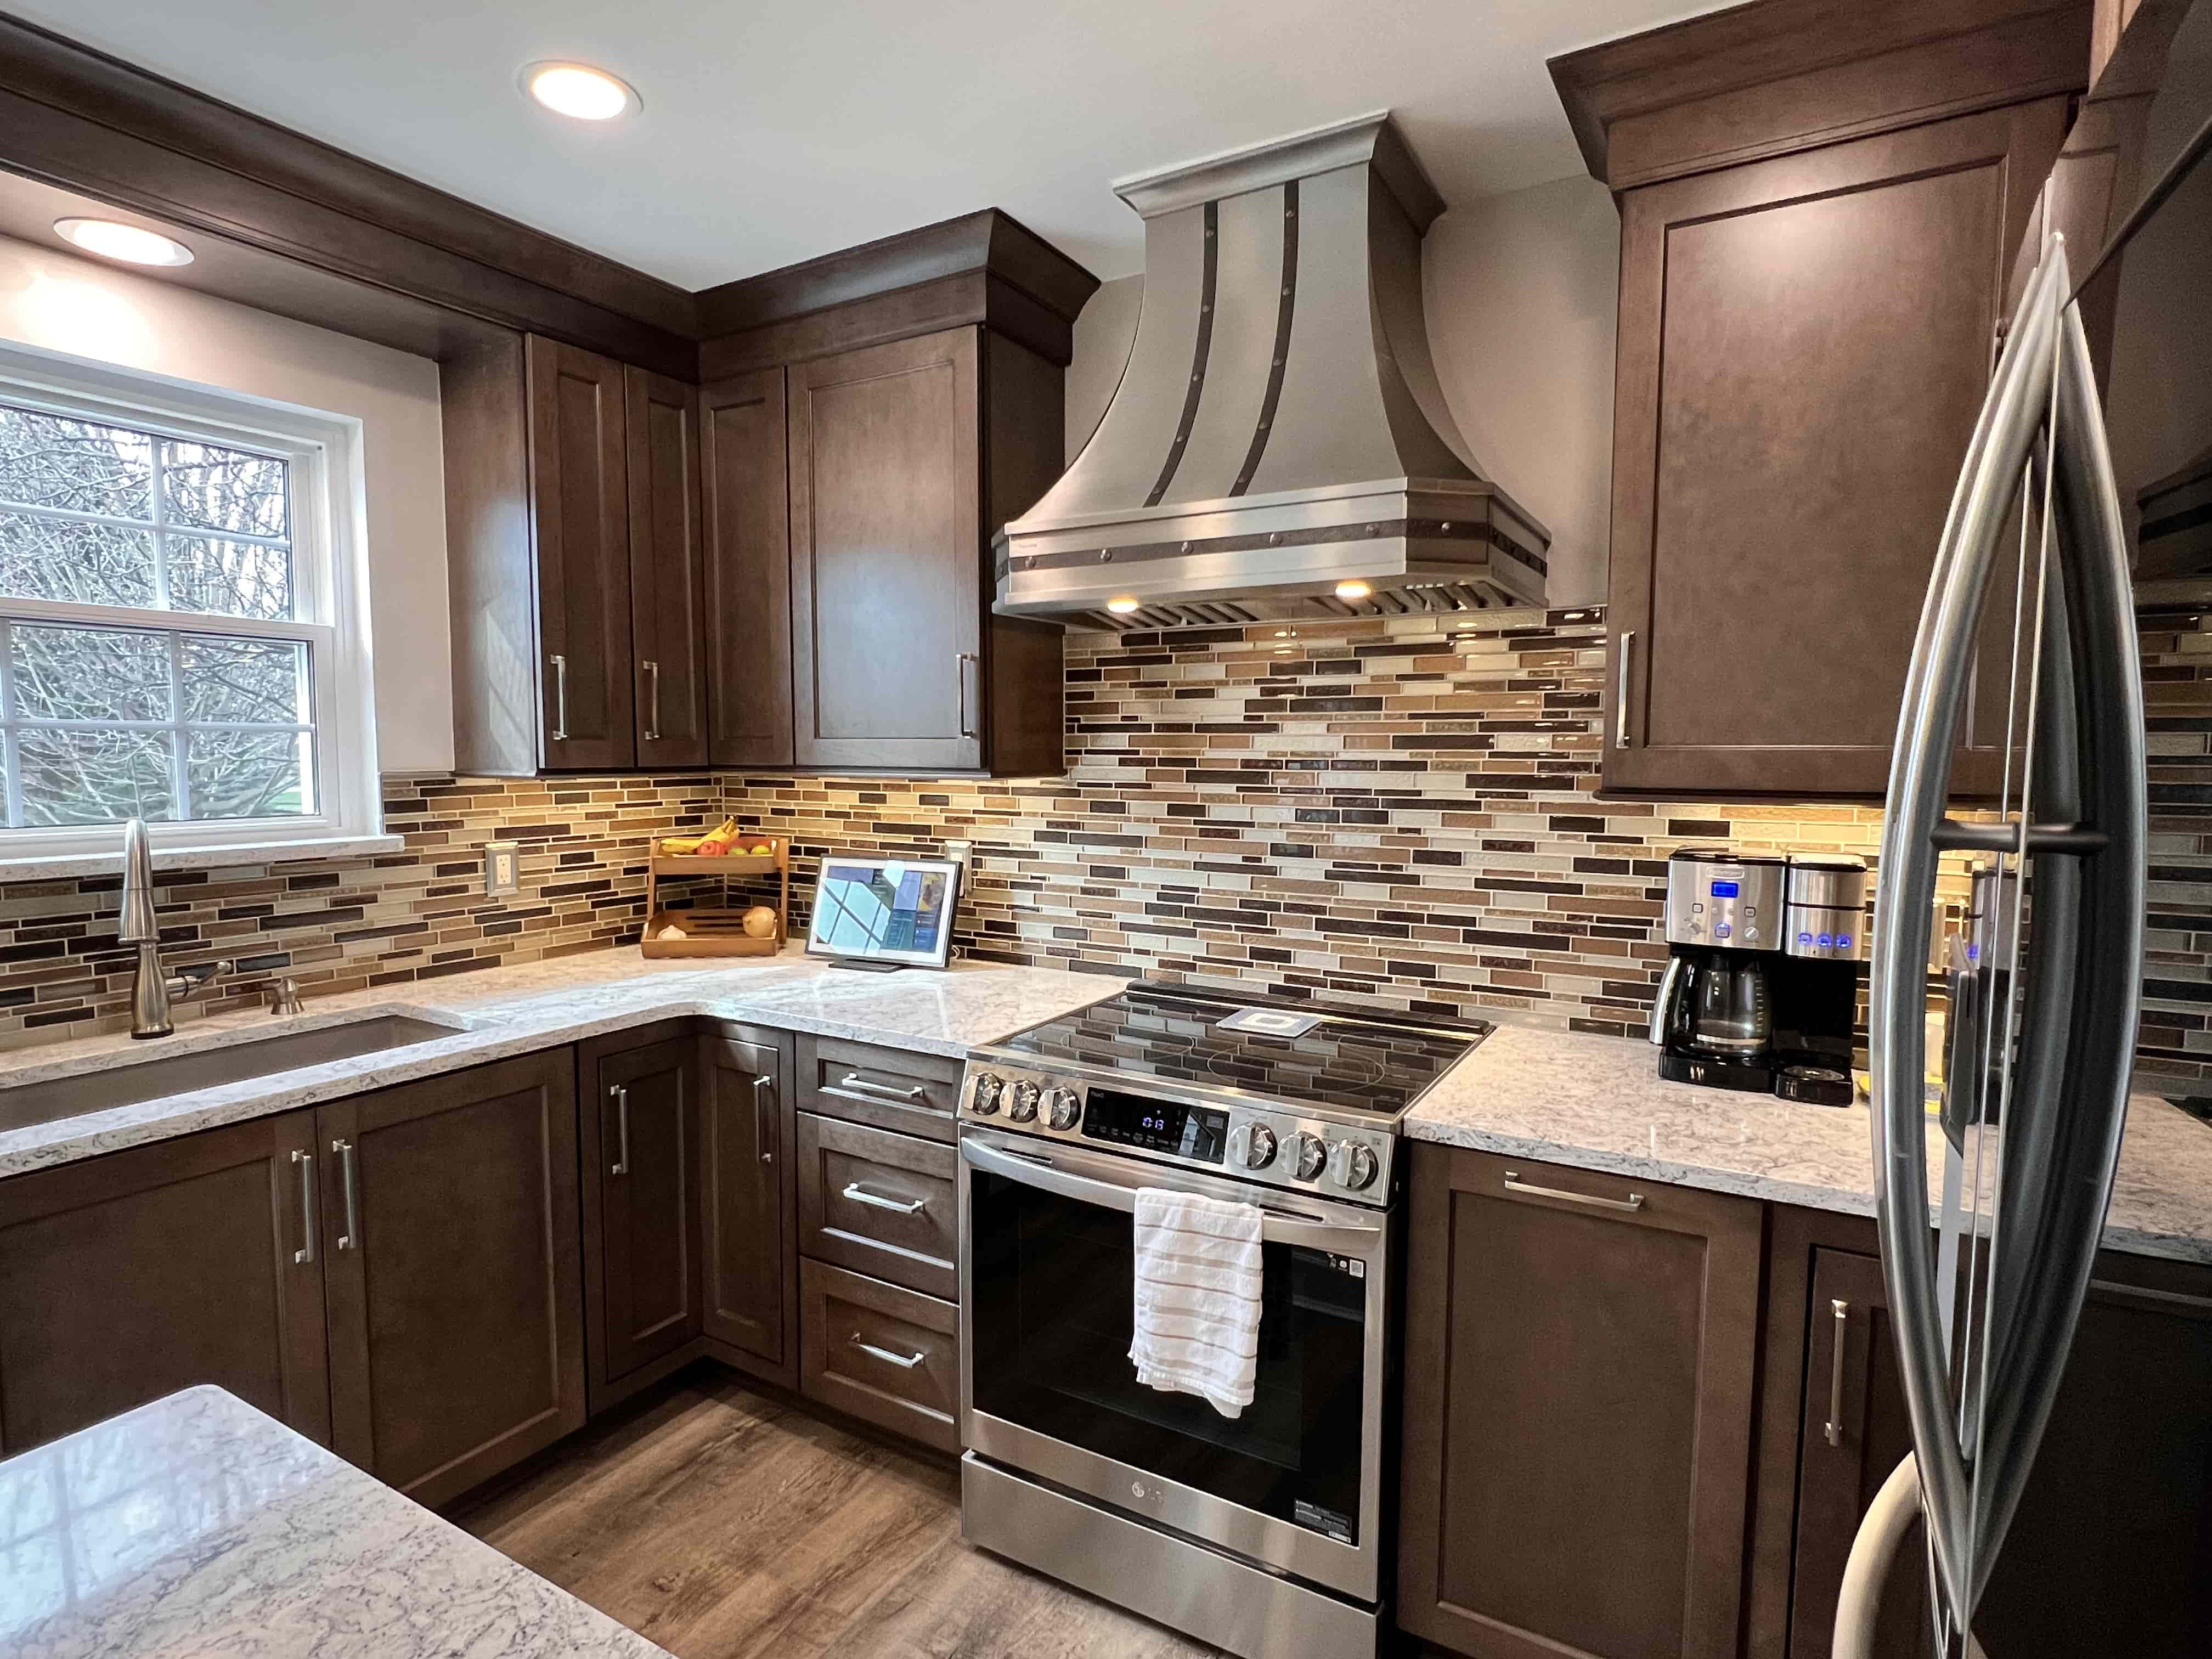 French-inspired design with sleek brown cabinets, luxurious marble countertops, marble backsplash, all crowned by a stunning range hood